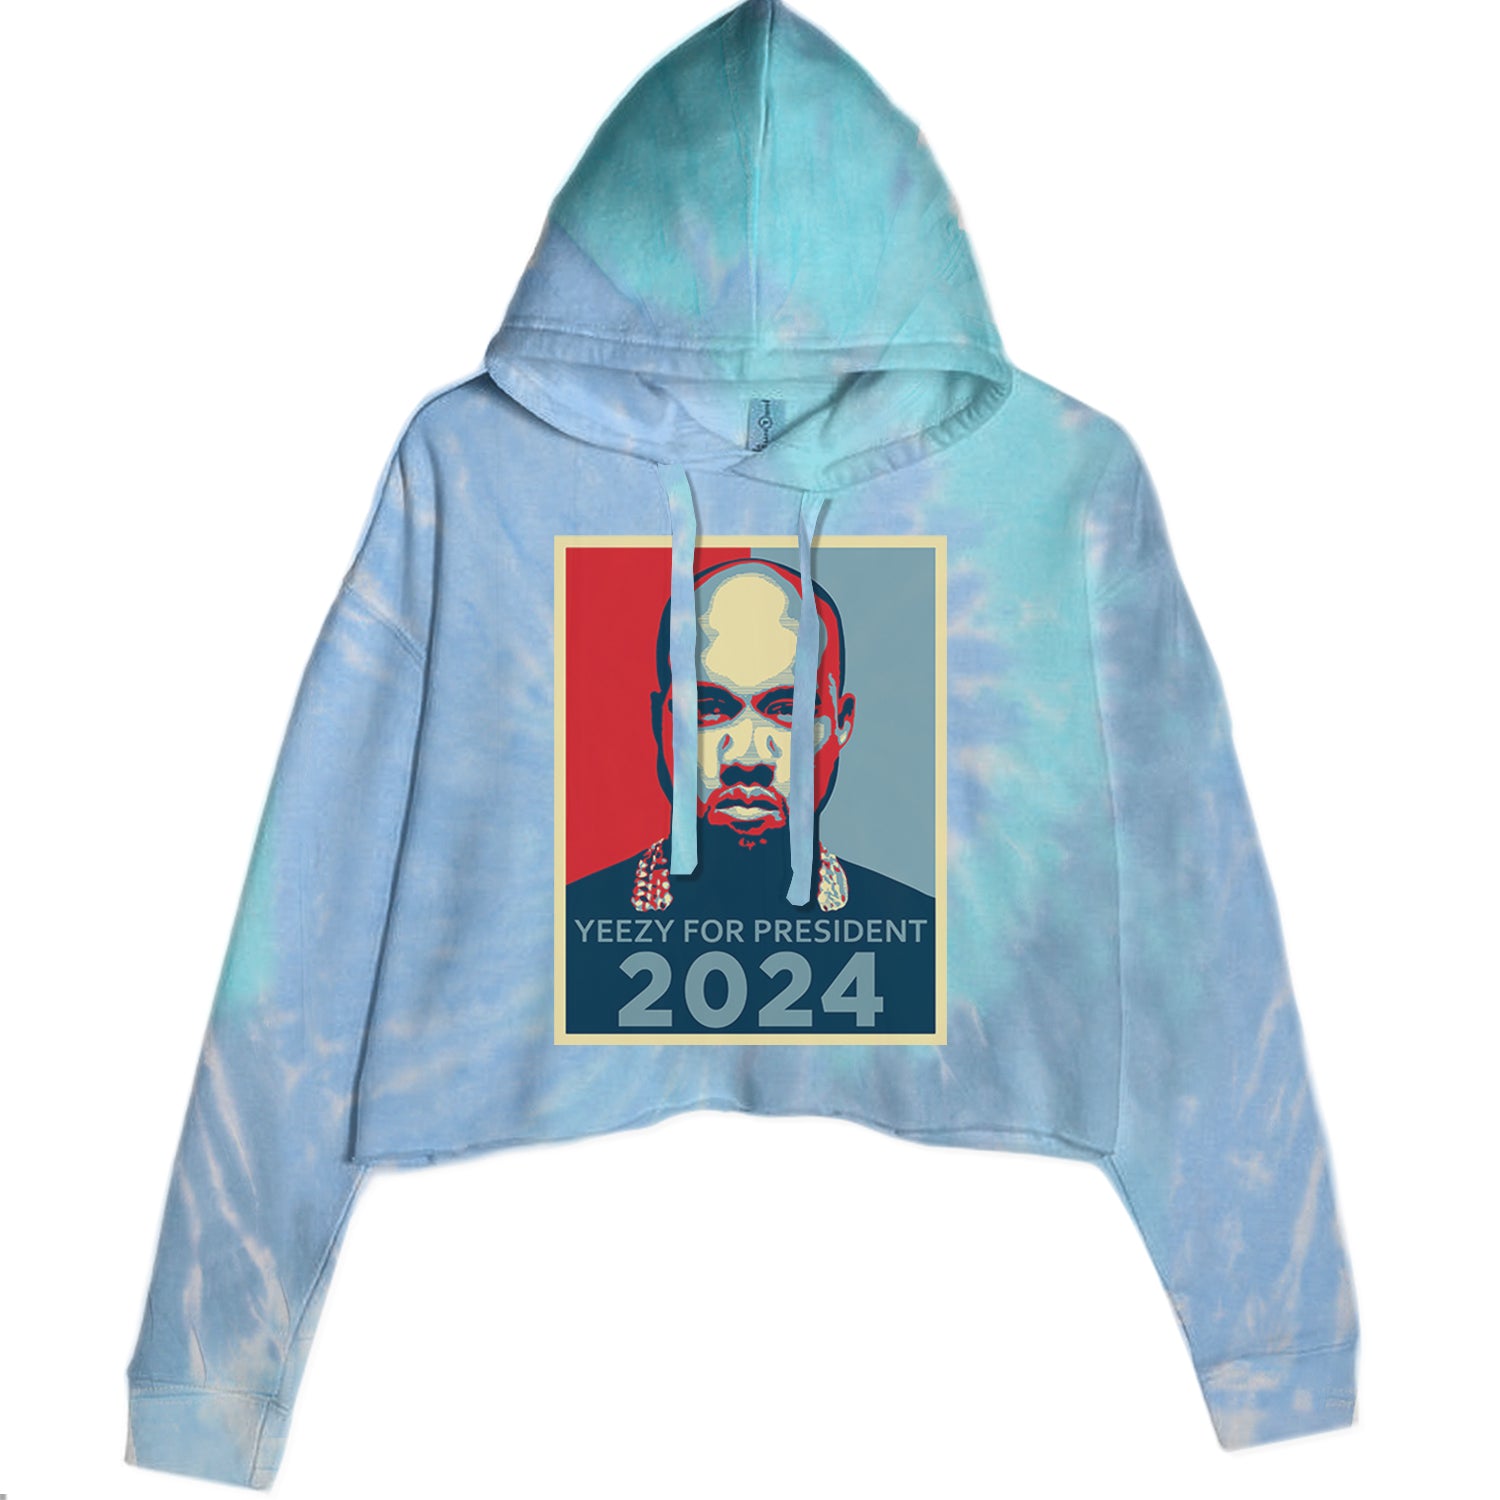 Yeezus For President Vote for Ye Values! Sweatshirt Blue Clouds